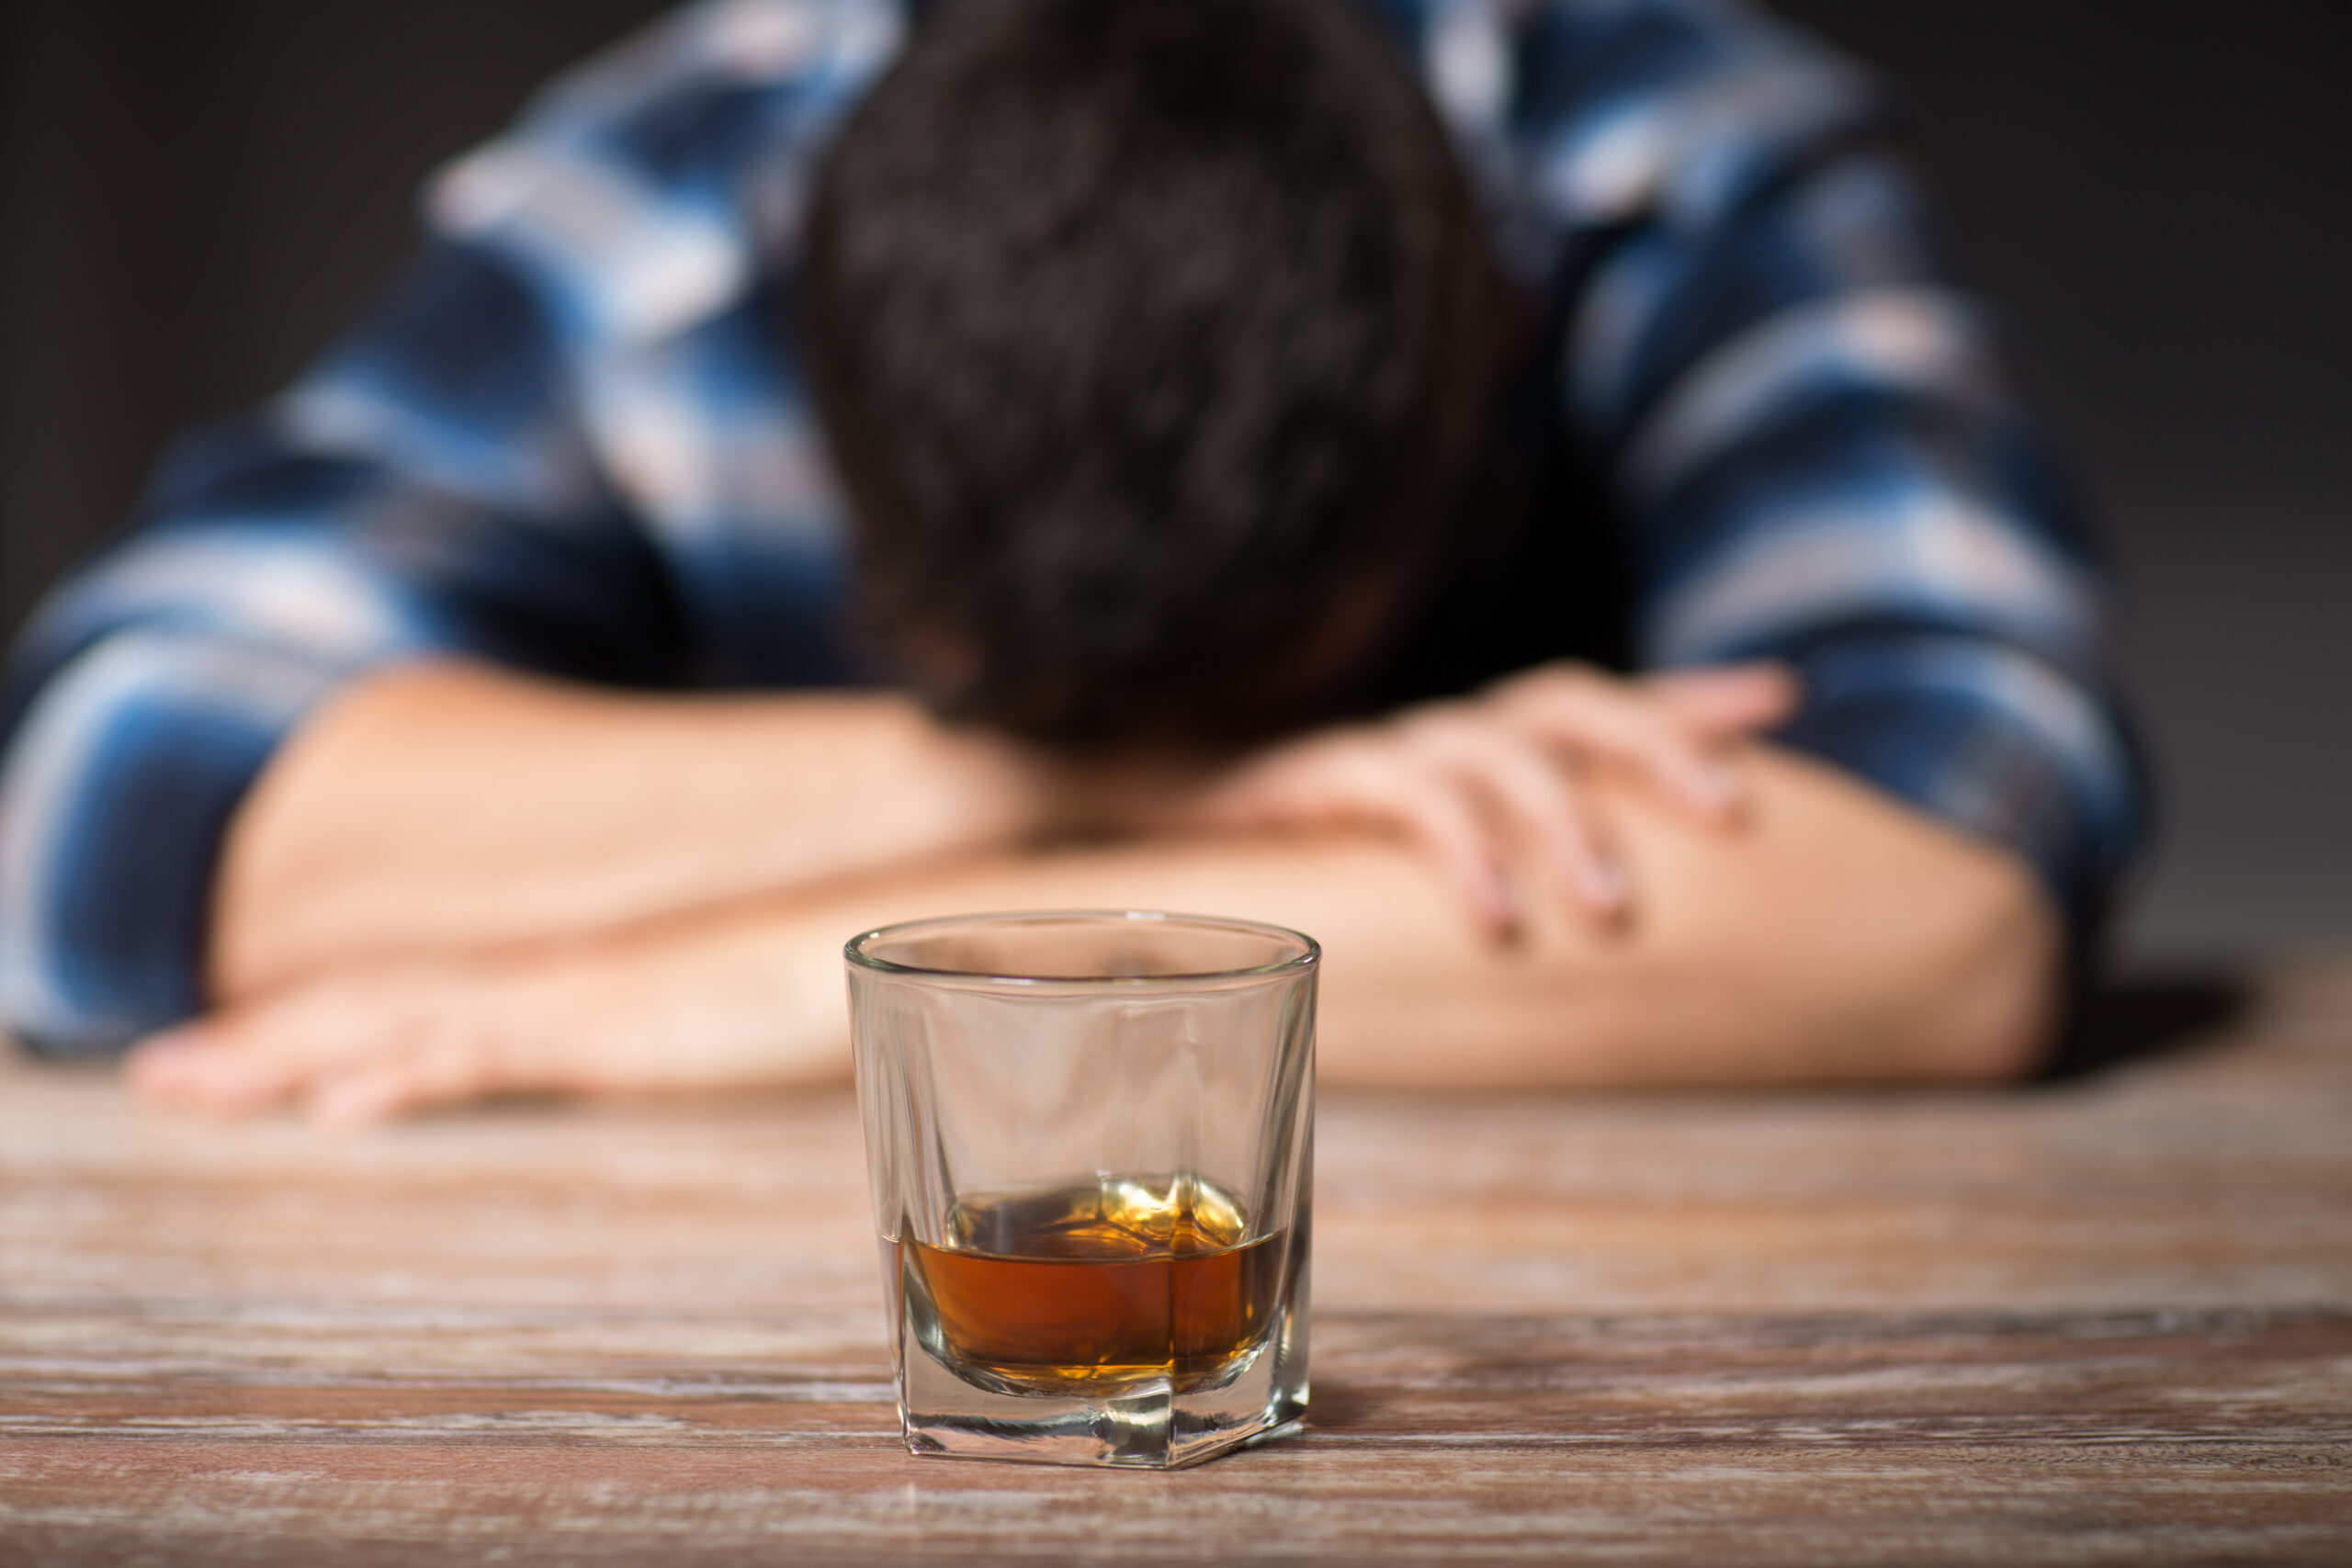 Are Men More Likely to Be Alcoholics?